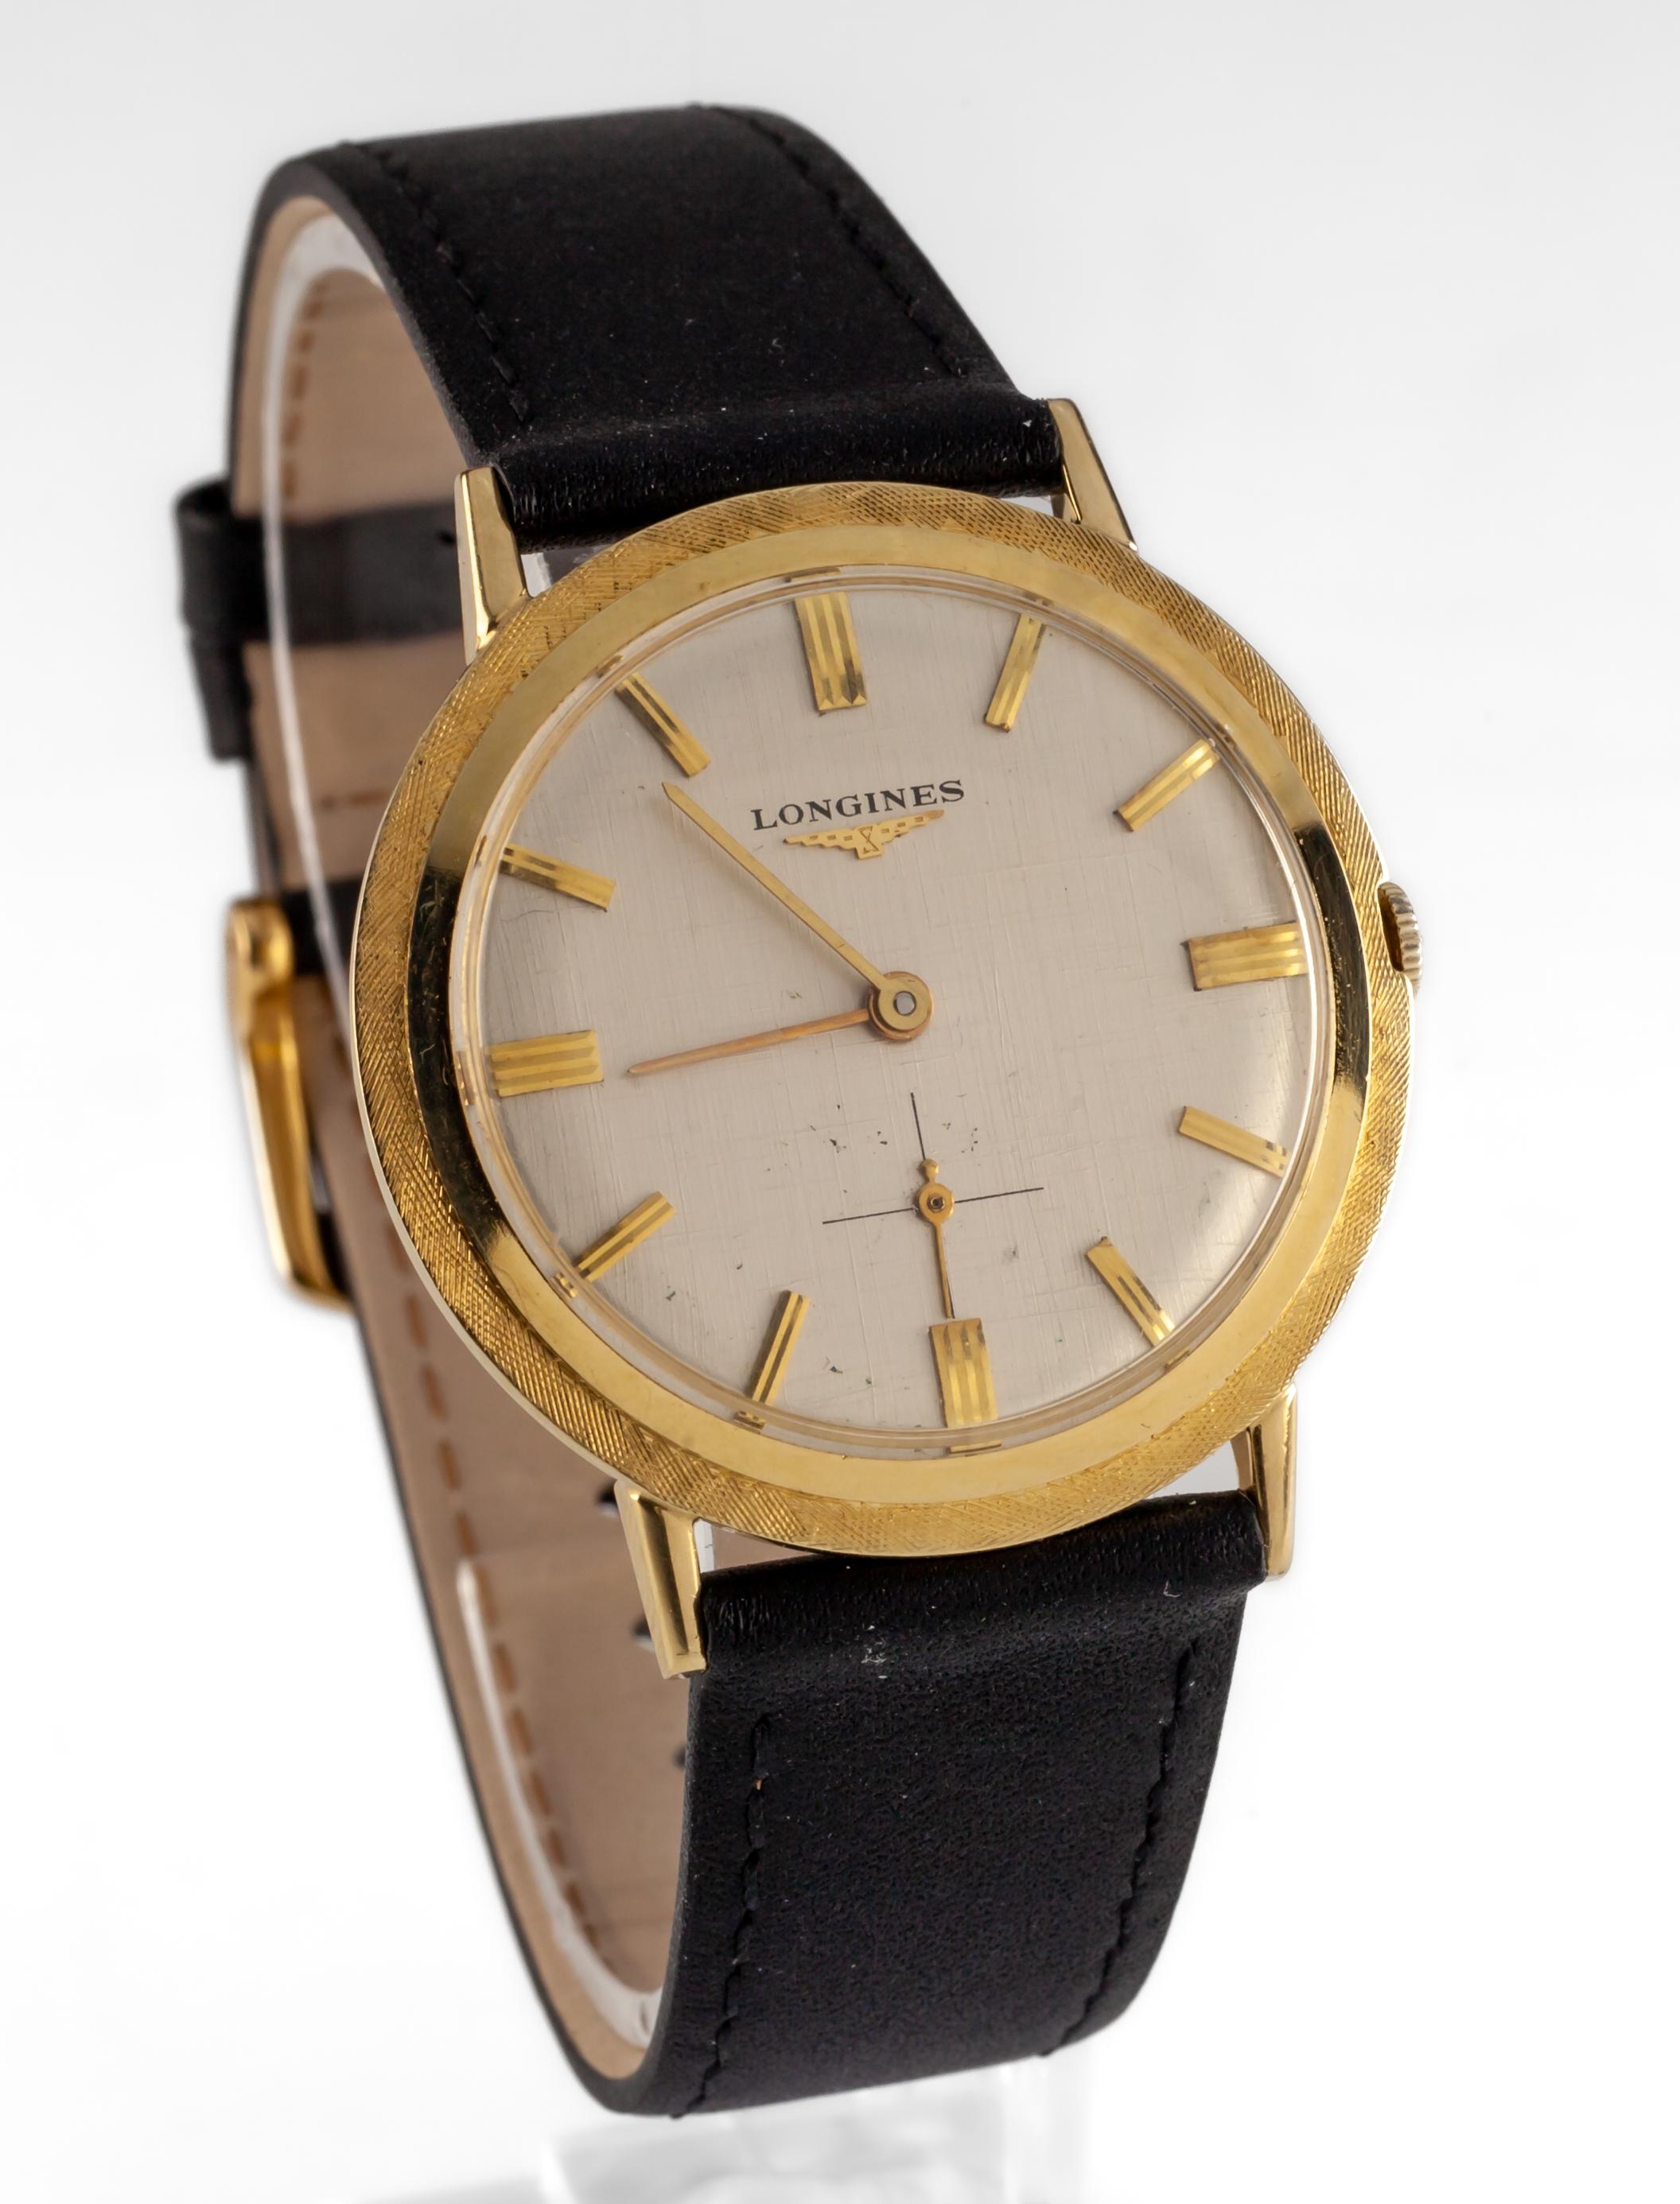 14k Yellow Gold Longines Mens Hand-Winding Watch w/ Leather Band 23.Z
Movement #23.Z
Case #710937.179
14k Yellow Gold Round Case
34 mm in Diameter (35 mm w/ Crown)
Lug-to-Lug Distance = 38 mm
Lug-to-Lug Width = 18 mm
Thickness = 7 mm
Silver Textured